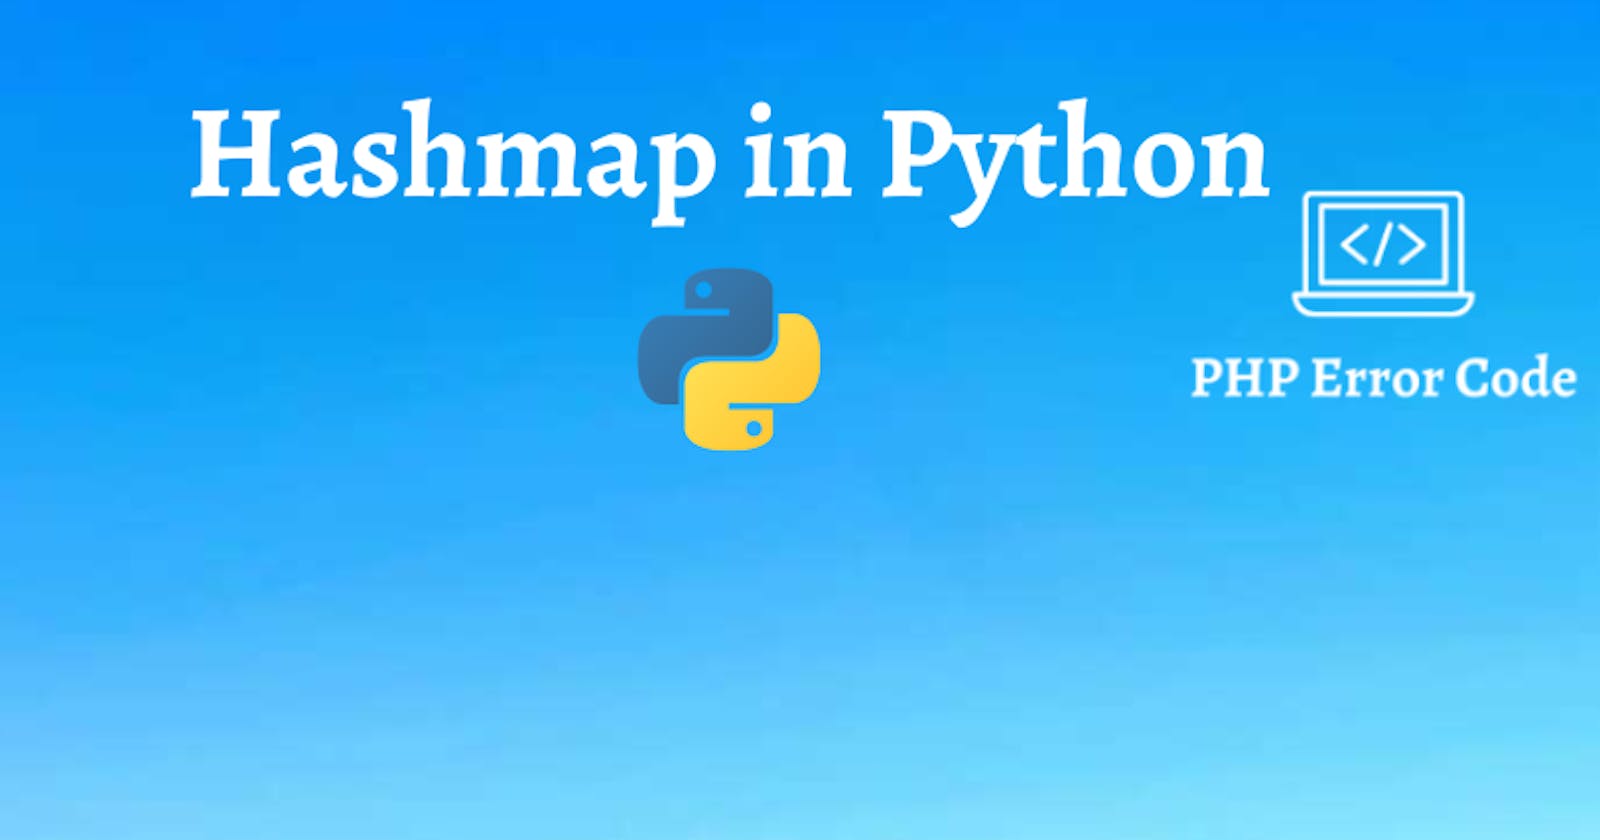 What is hashmap in Python